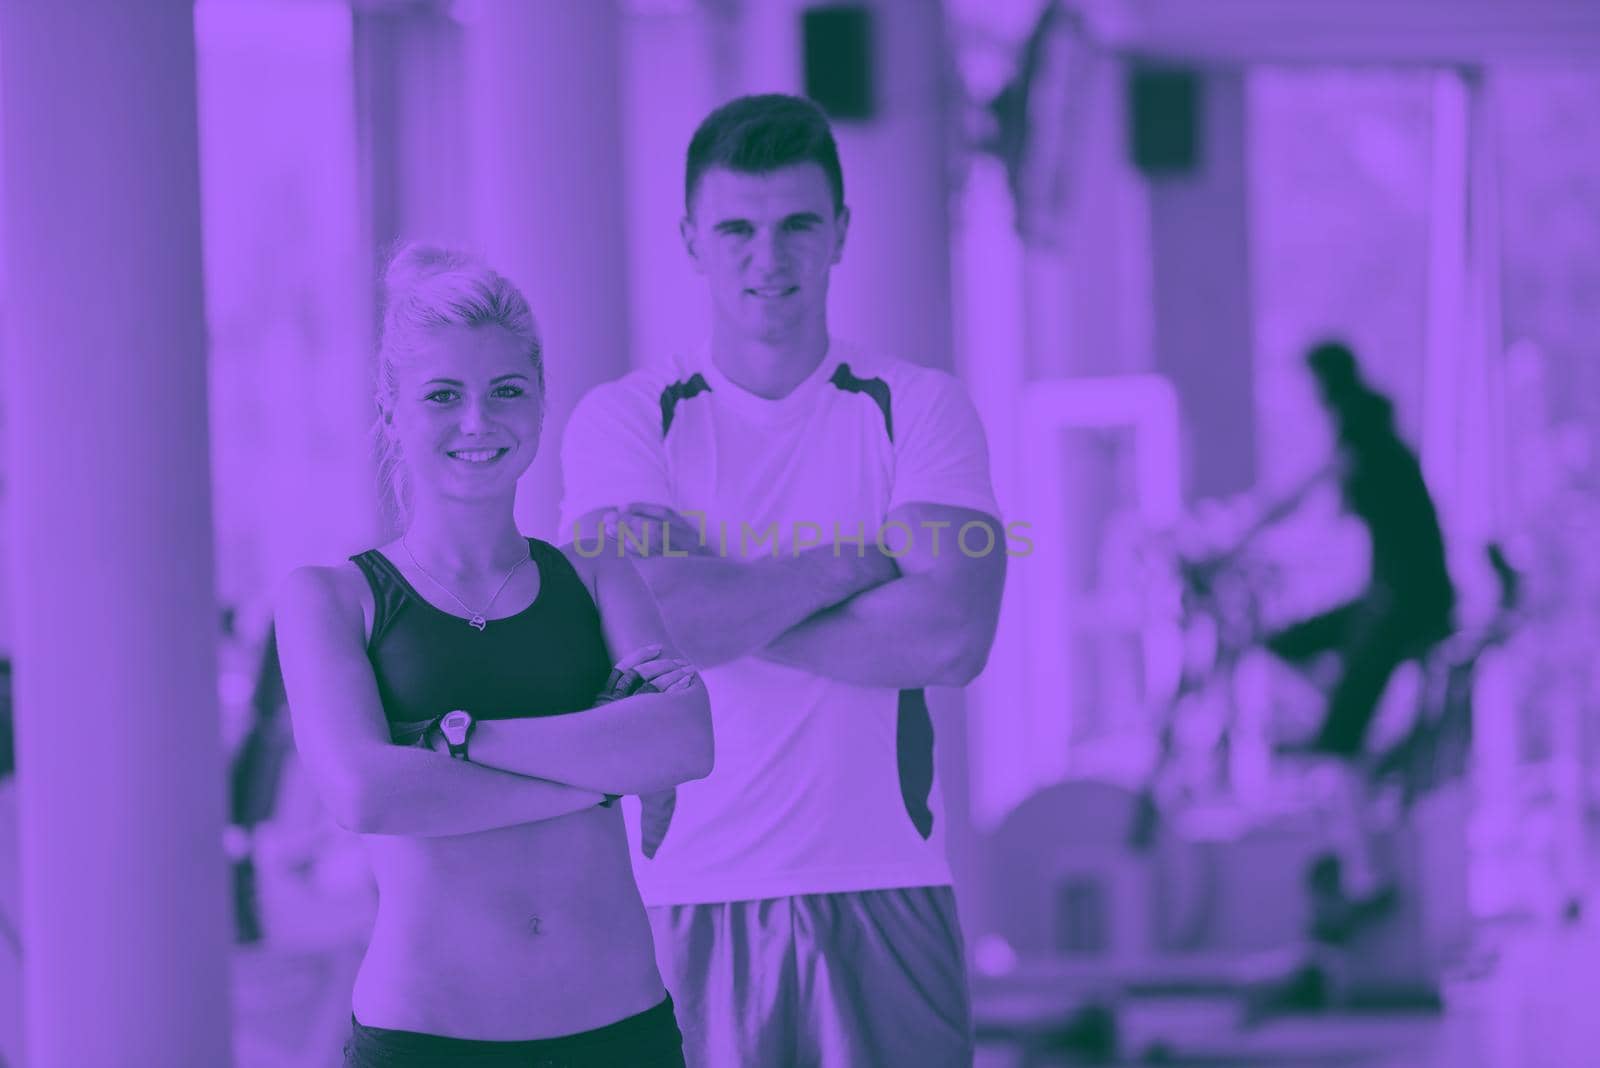 group portrait of healthy and fit young people in fitness gym duo tone